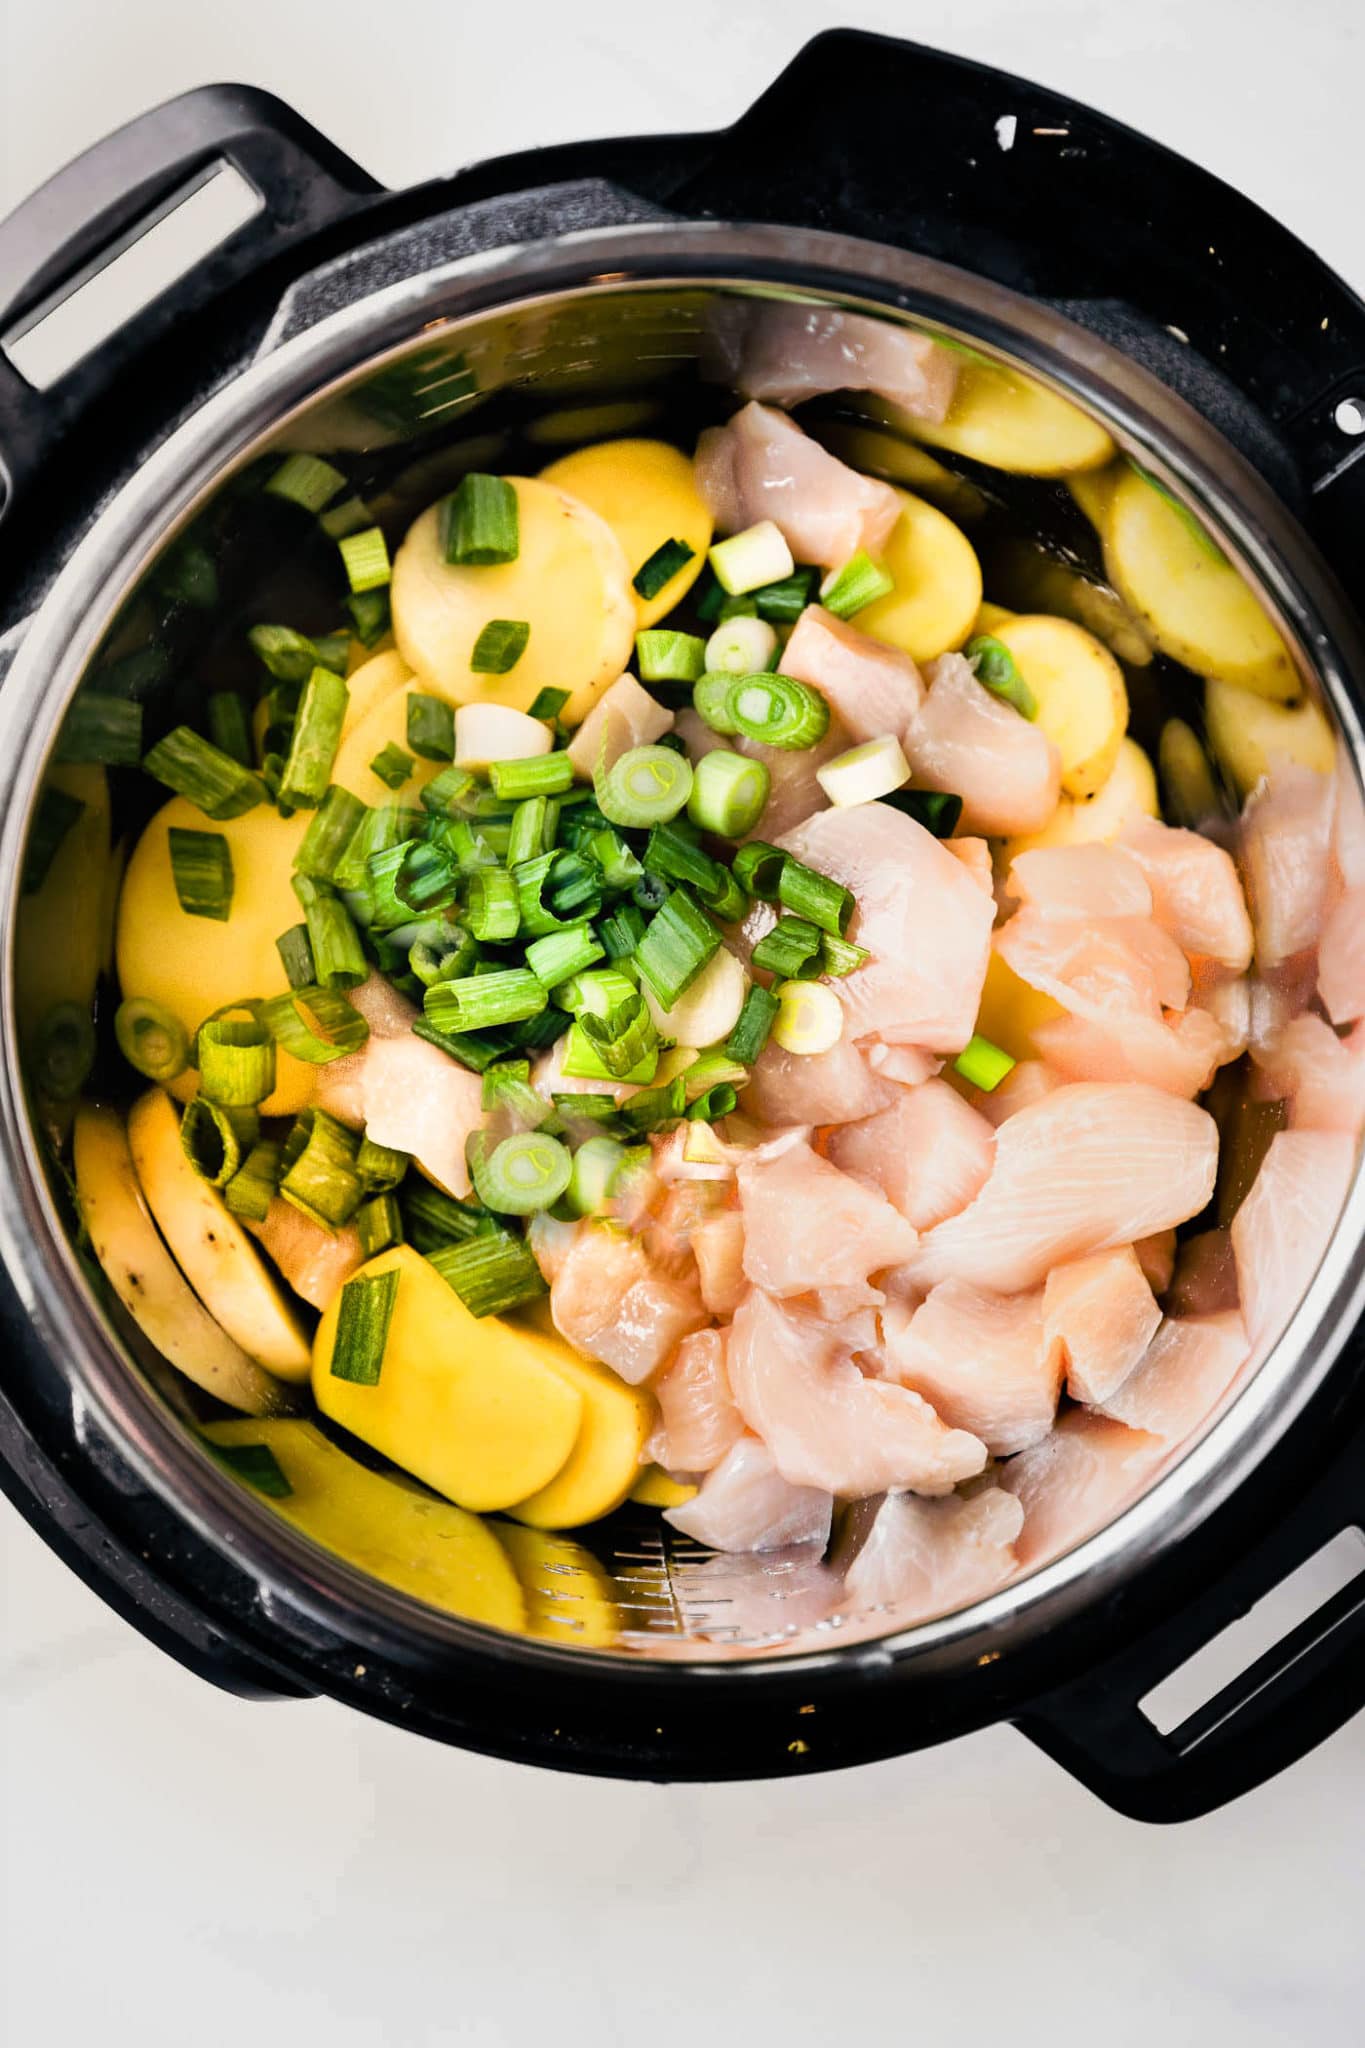 Chicken, potatoes, and scallions in an instant pot